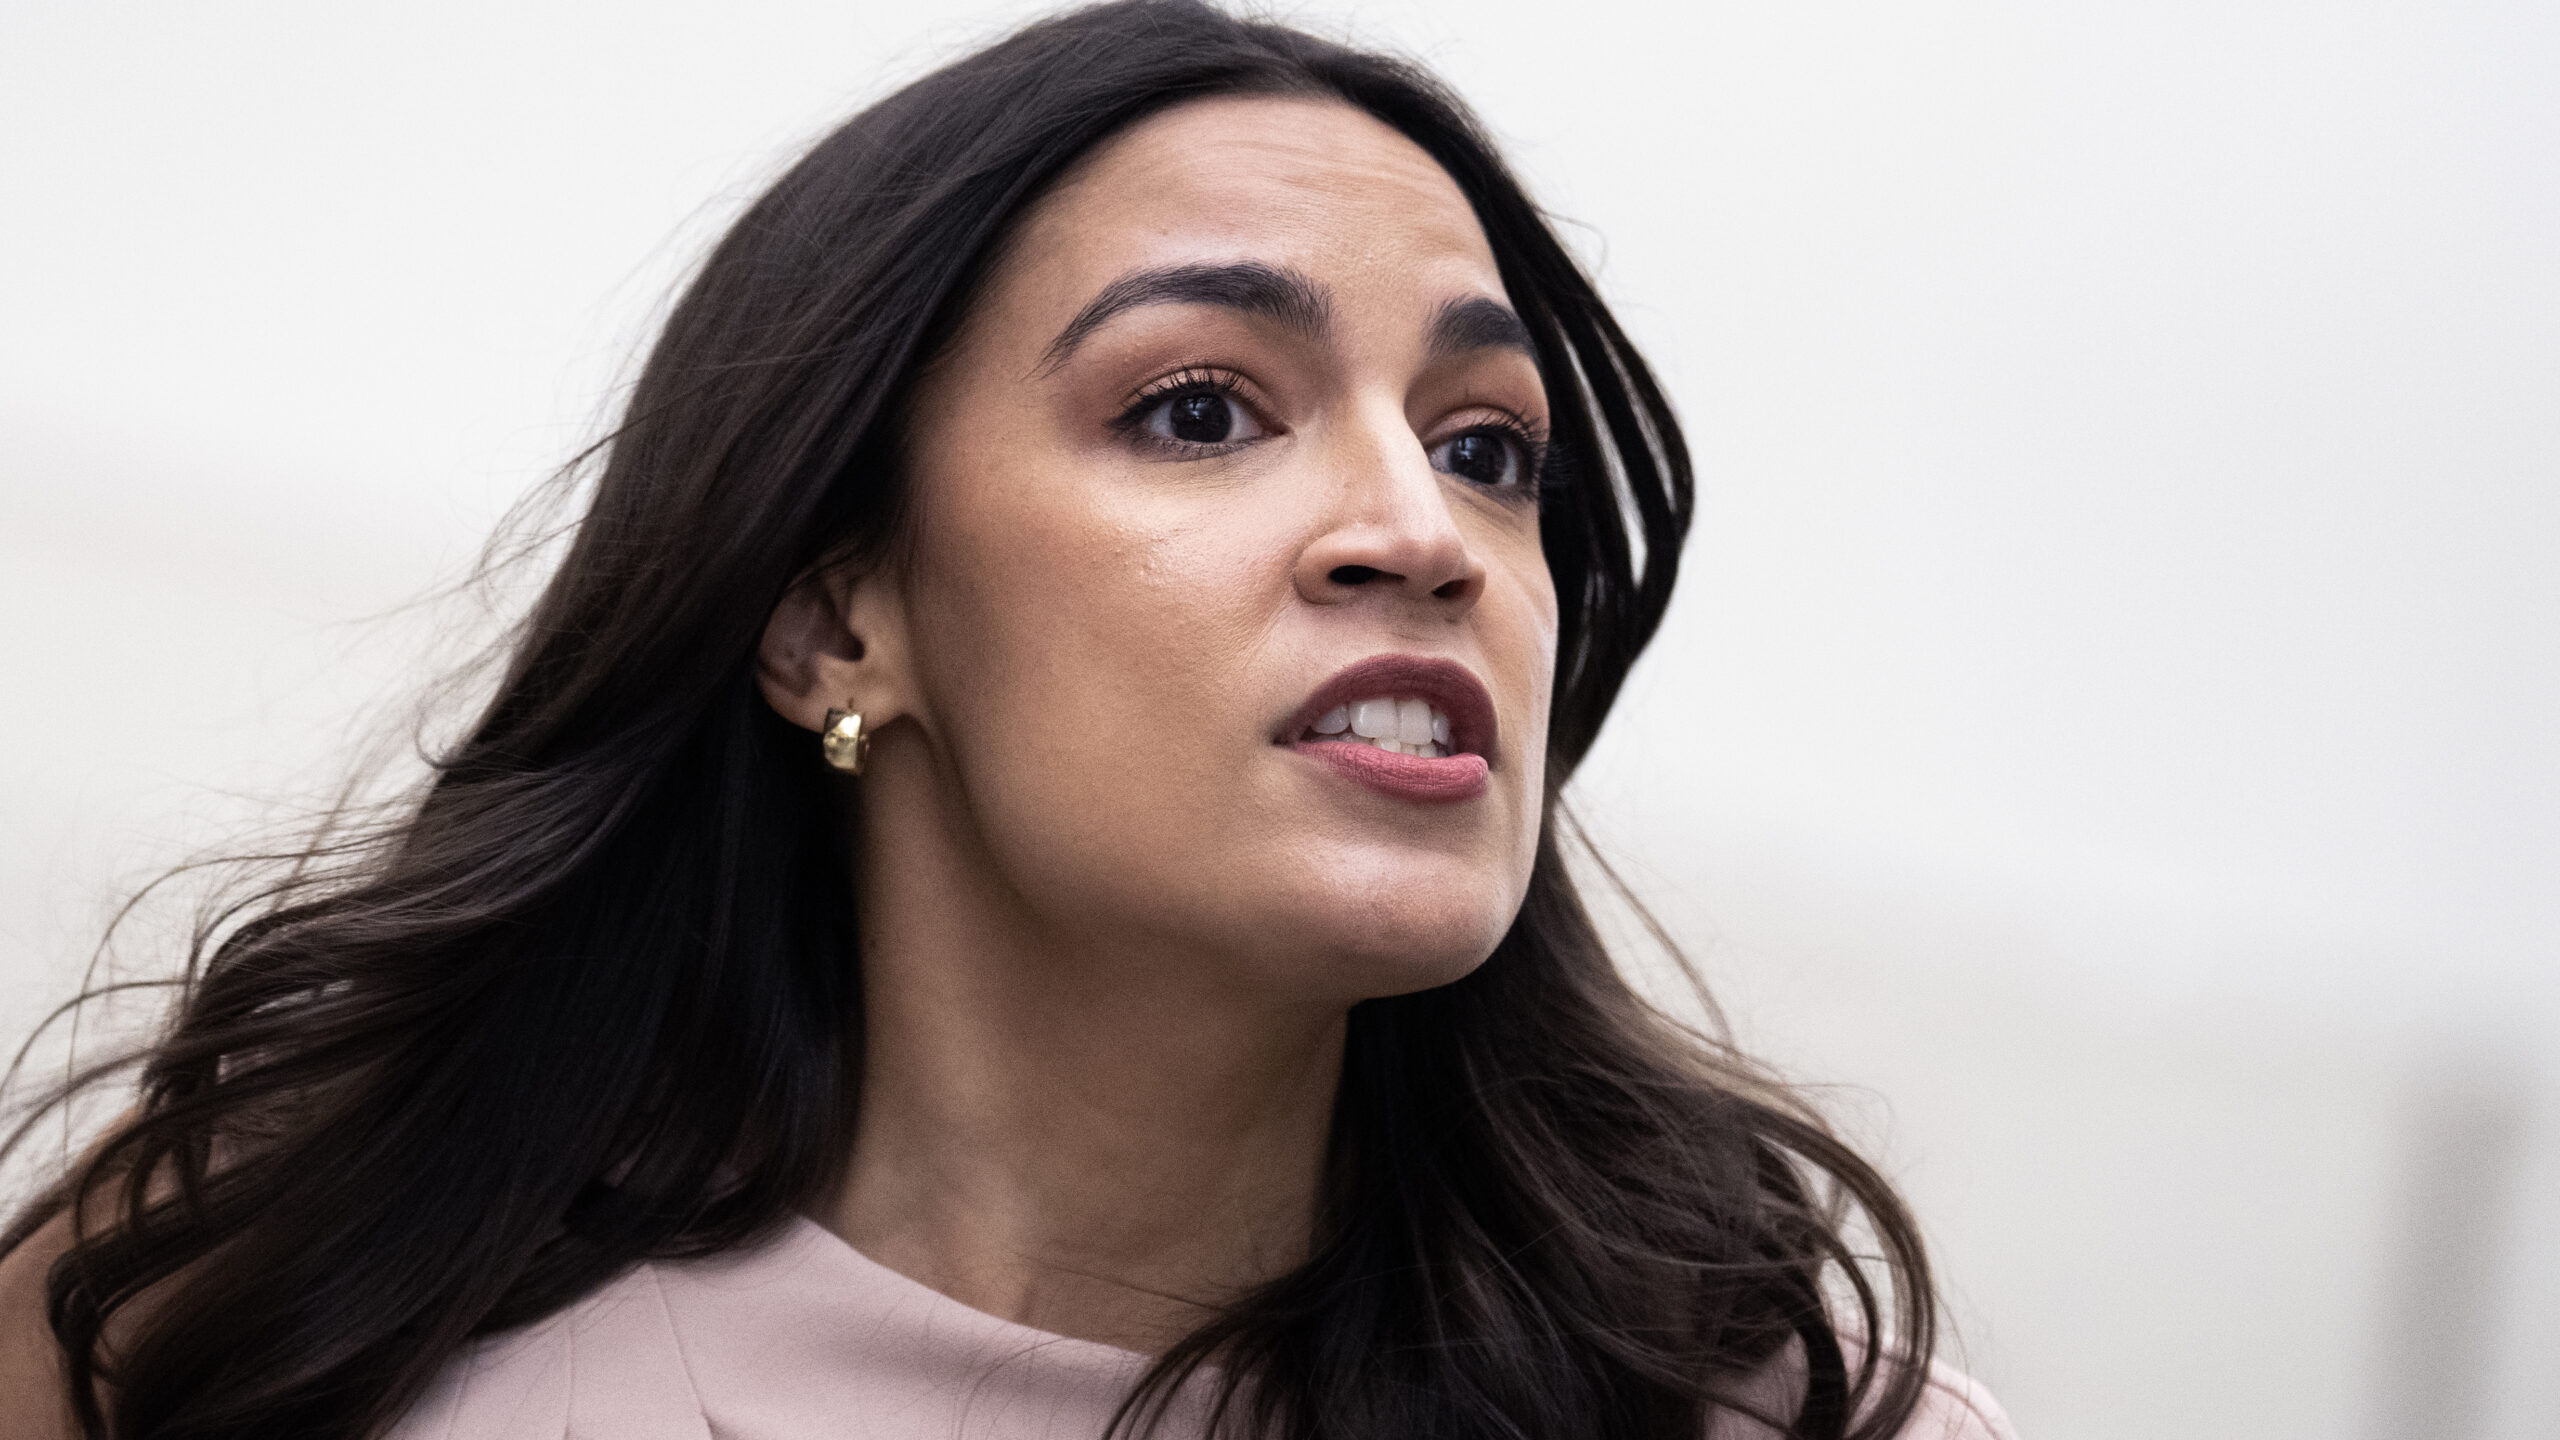 Fetterman sparks AOC’s reaction with critique on congressional hearing’s ‘Jerry Springer’ style